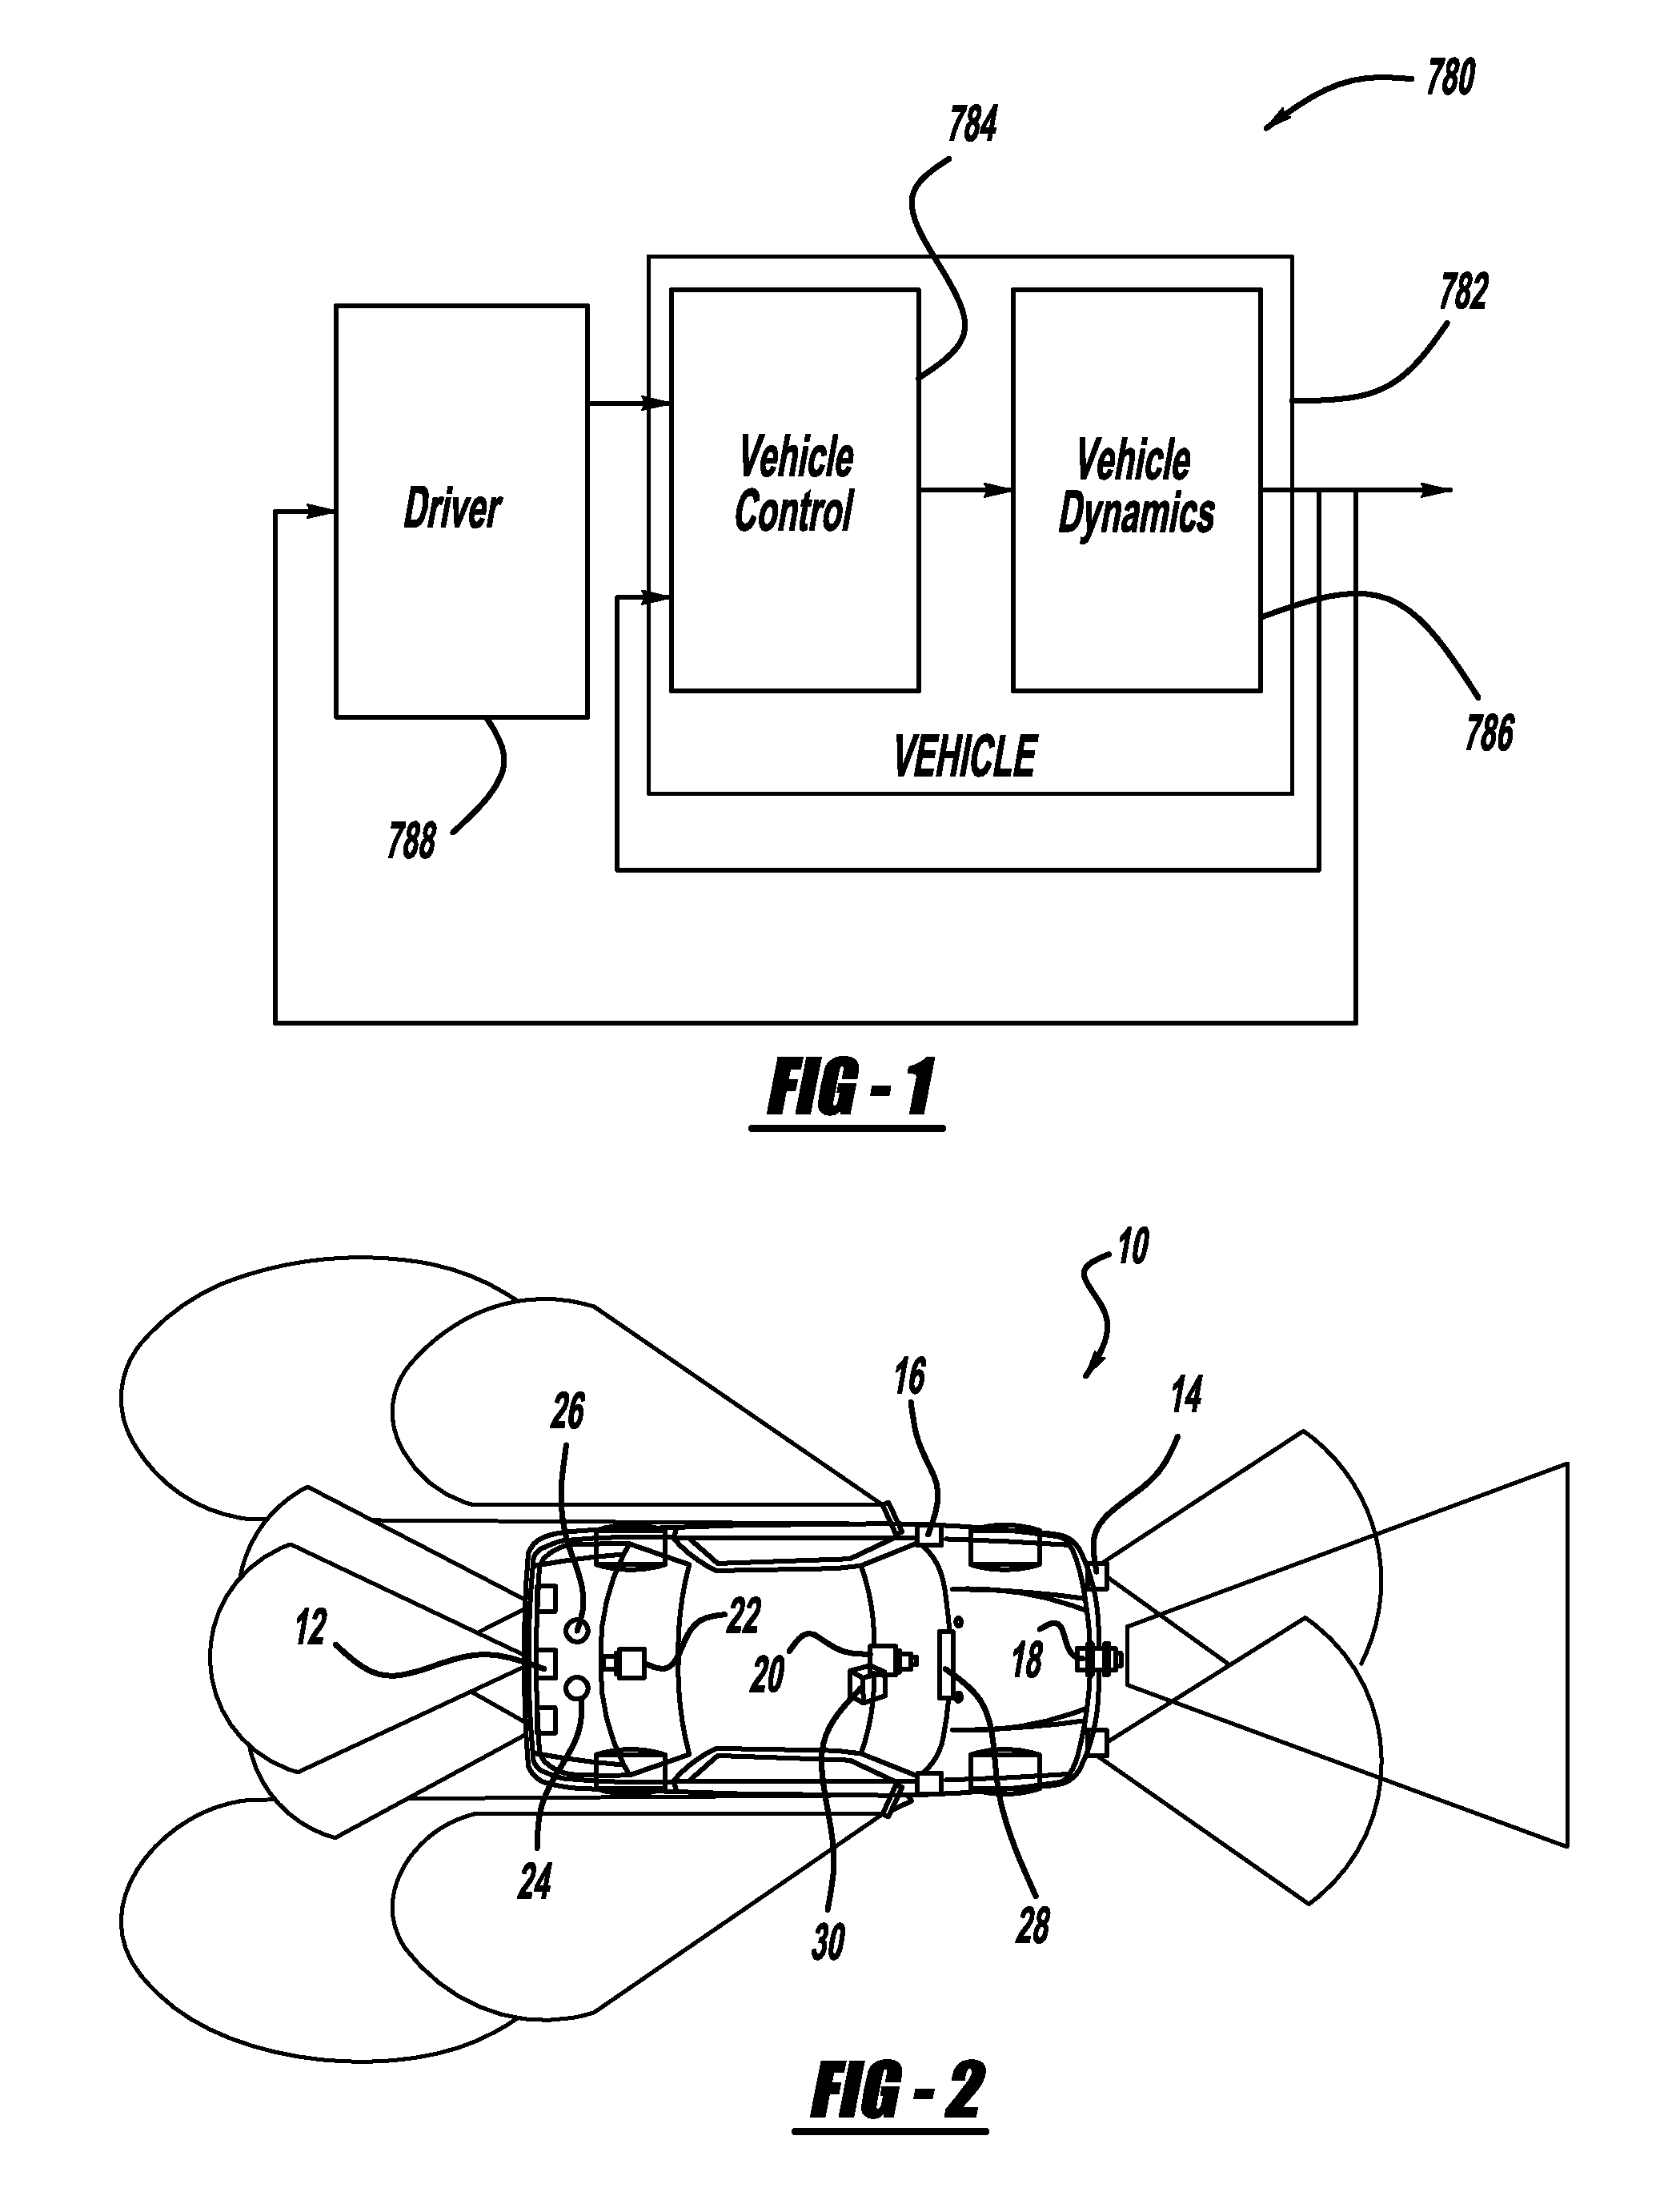 Vehicle stability enhancement control adaptation to driving skill based on highway on/off ramp maneuver